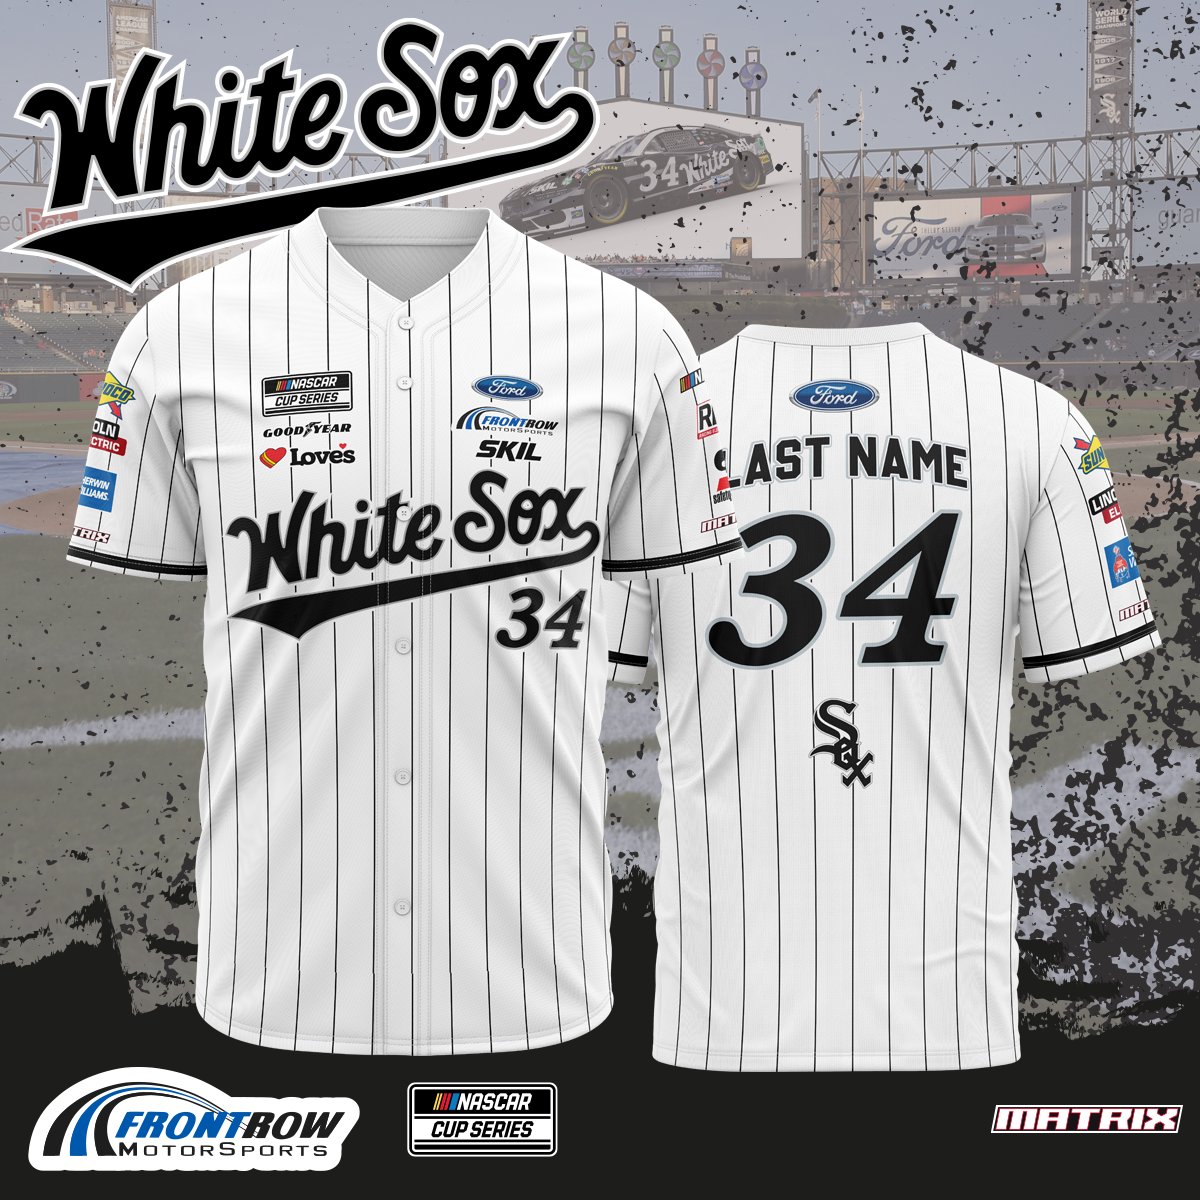 Motorsports 🤝 Baseball The perfect pair. What do you say @Team_FRM? Should we bring these personalized, full button crew shirts (crew jerseys?) to life for @NASCARChicago? Each crew member's last name, and the iconic 'FRM #34' complete the Southside look! DMs are open 😁